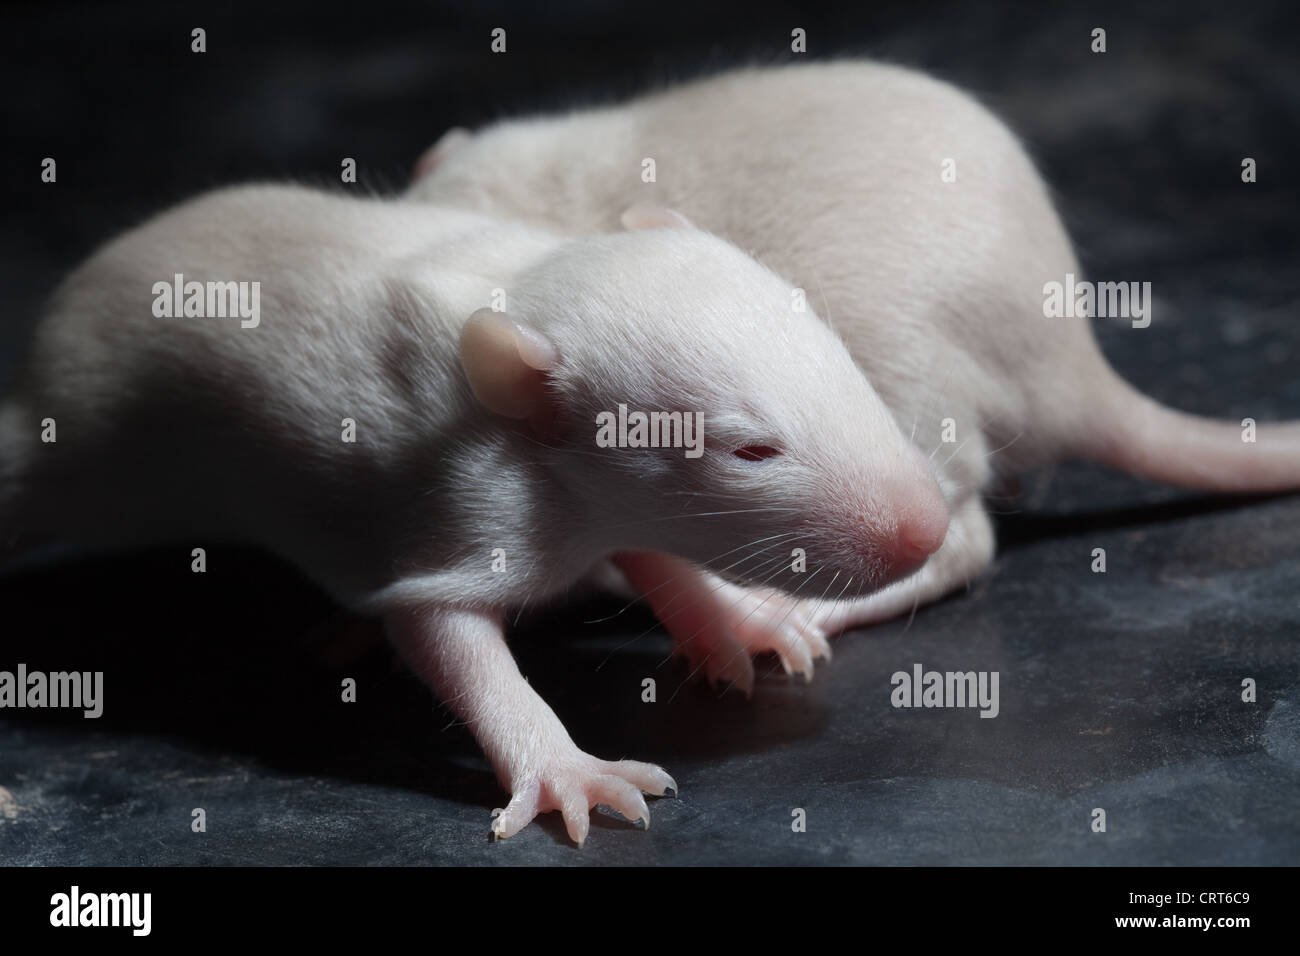 Domesticated White Rats (Rattus norvegicus). 12 days old baby, 'pup' rats. Albino, showing pink eyes beginning to open. Stock Photo